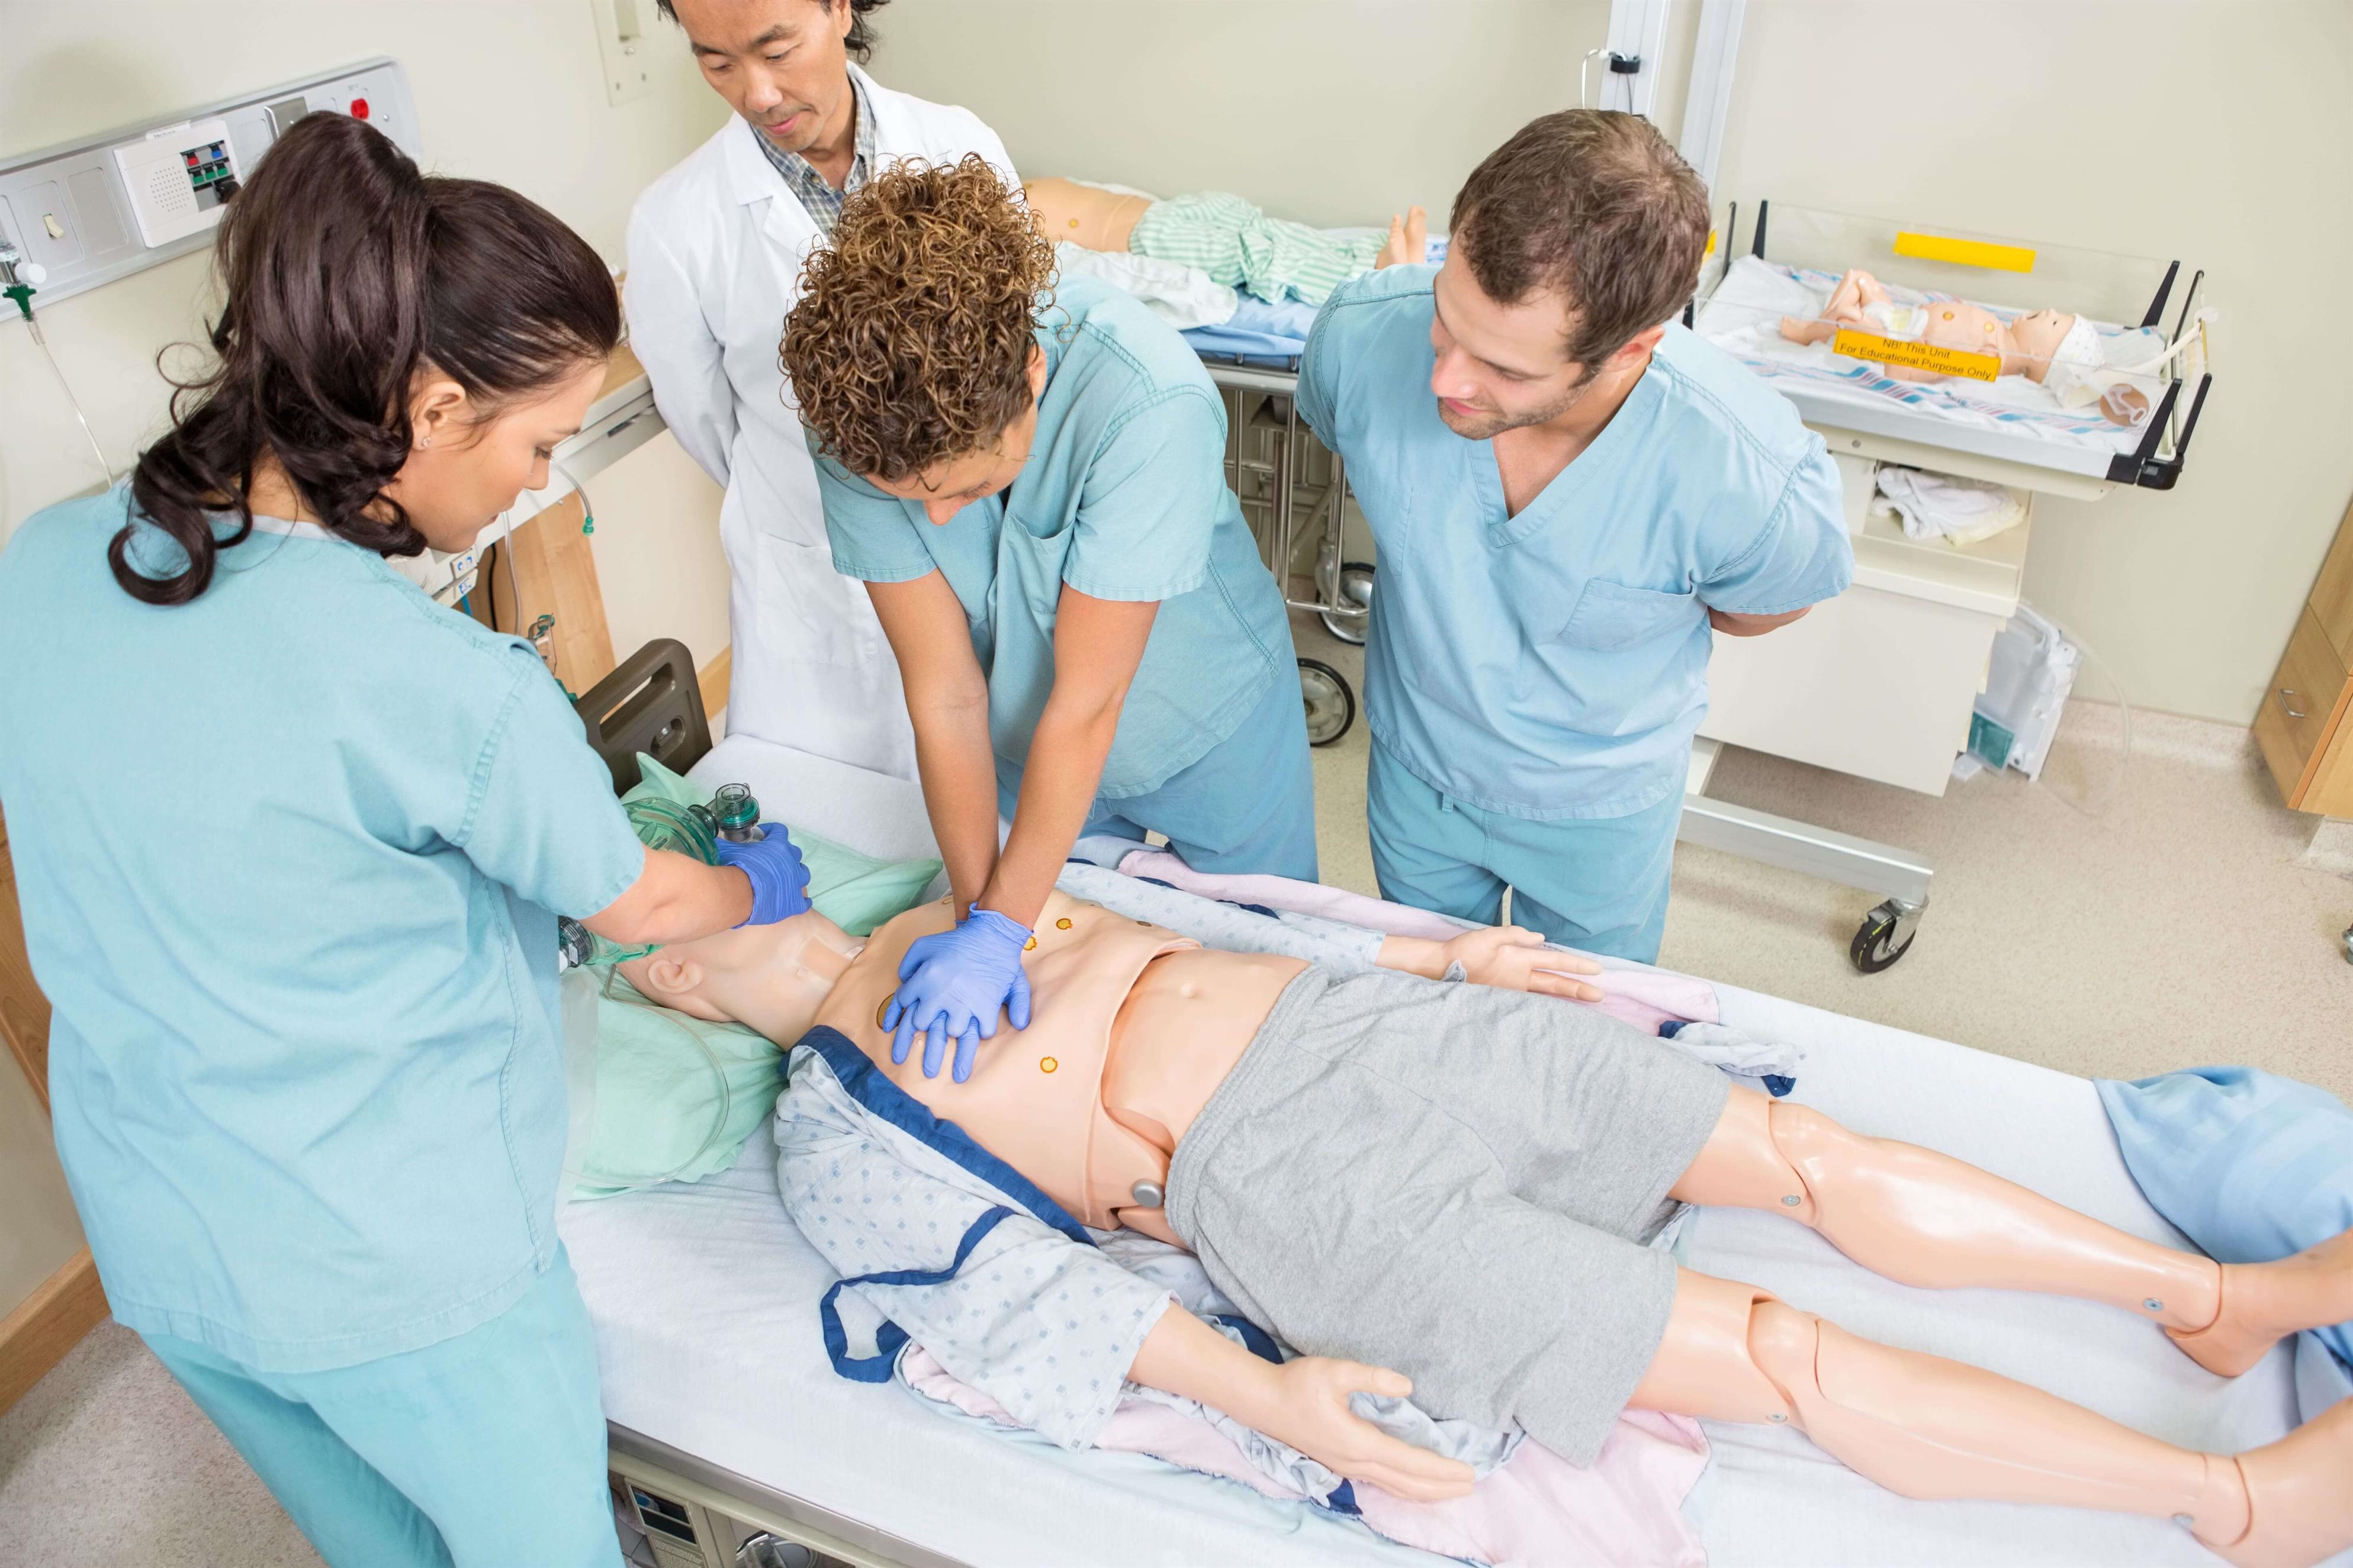 Nursing students performing CPR on a patient dummy